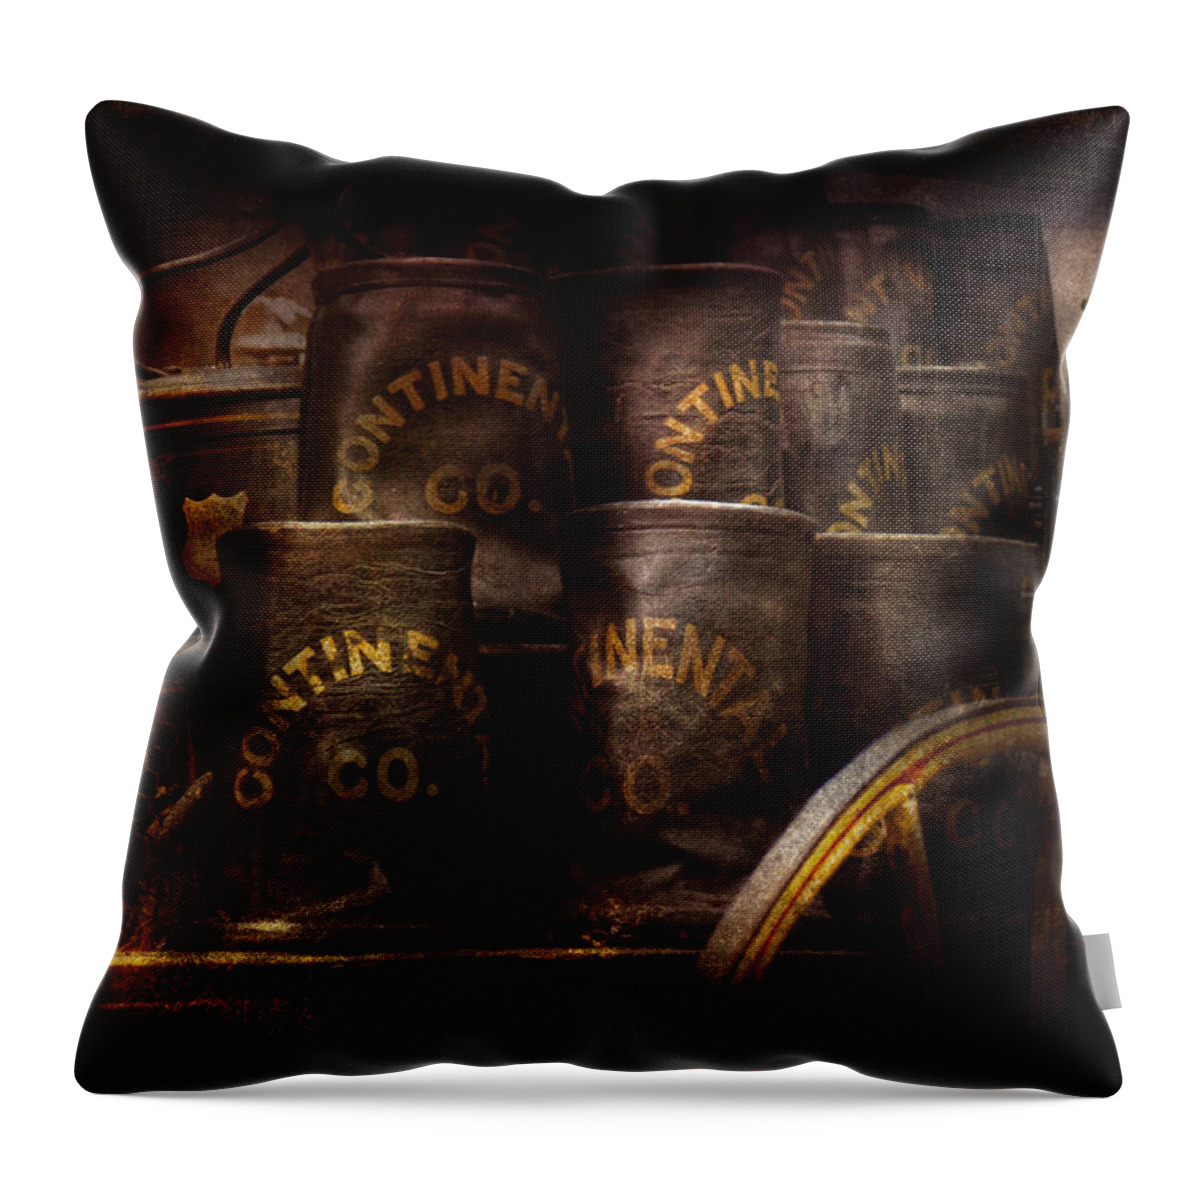 Hdr Throw Pillow featuring the photograph Fireman - Bucket Brigade by Mike Savad